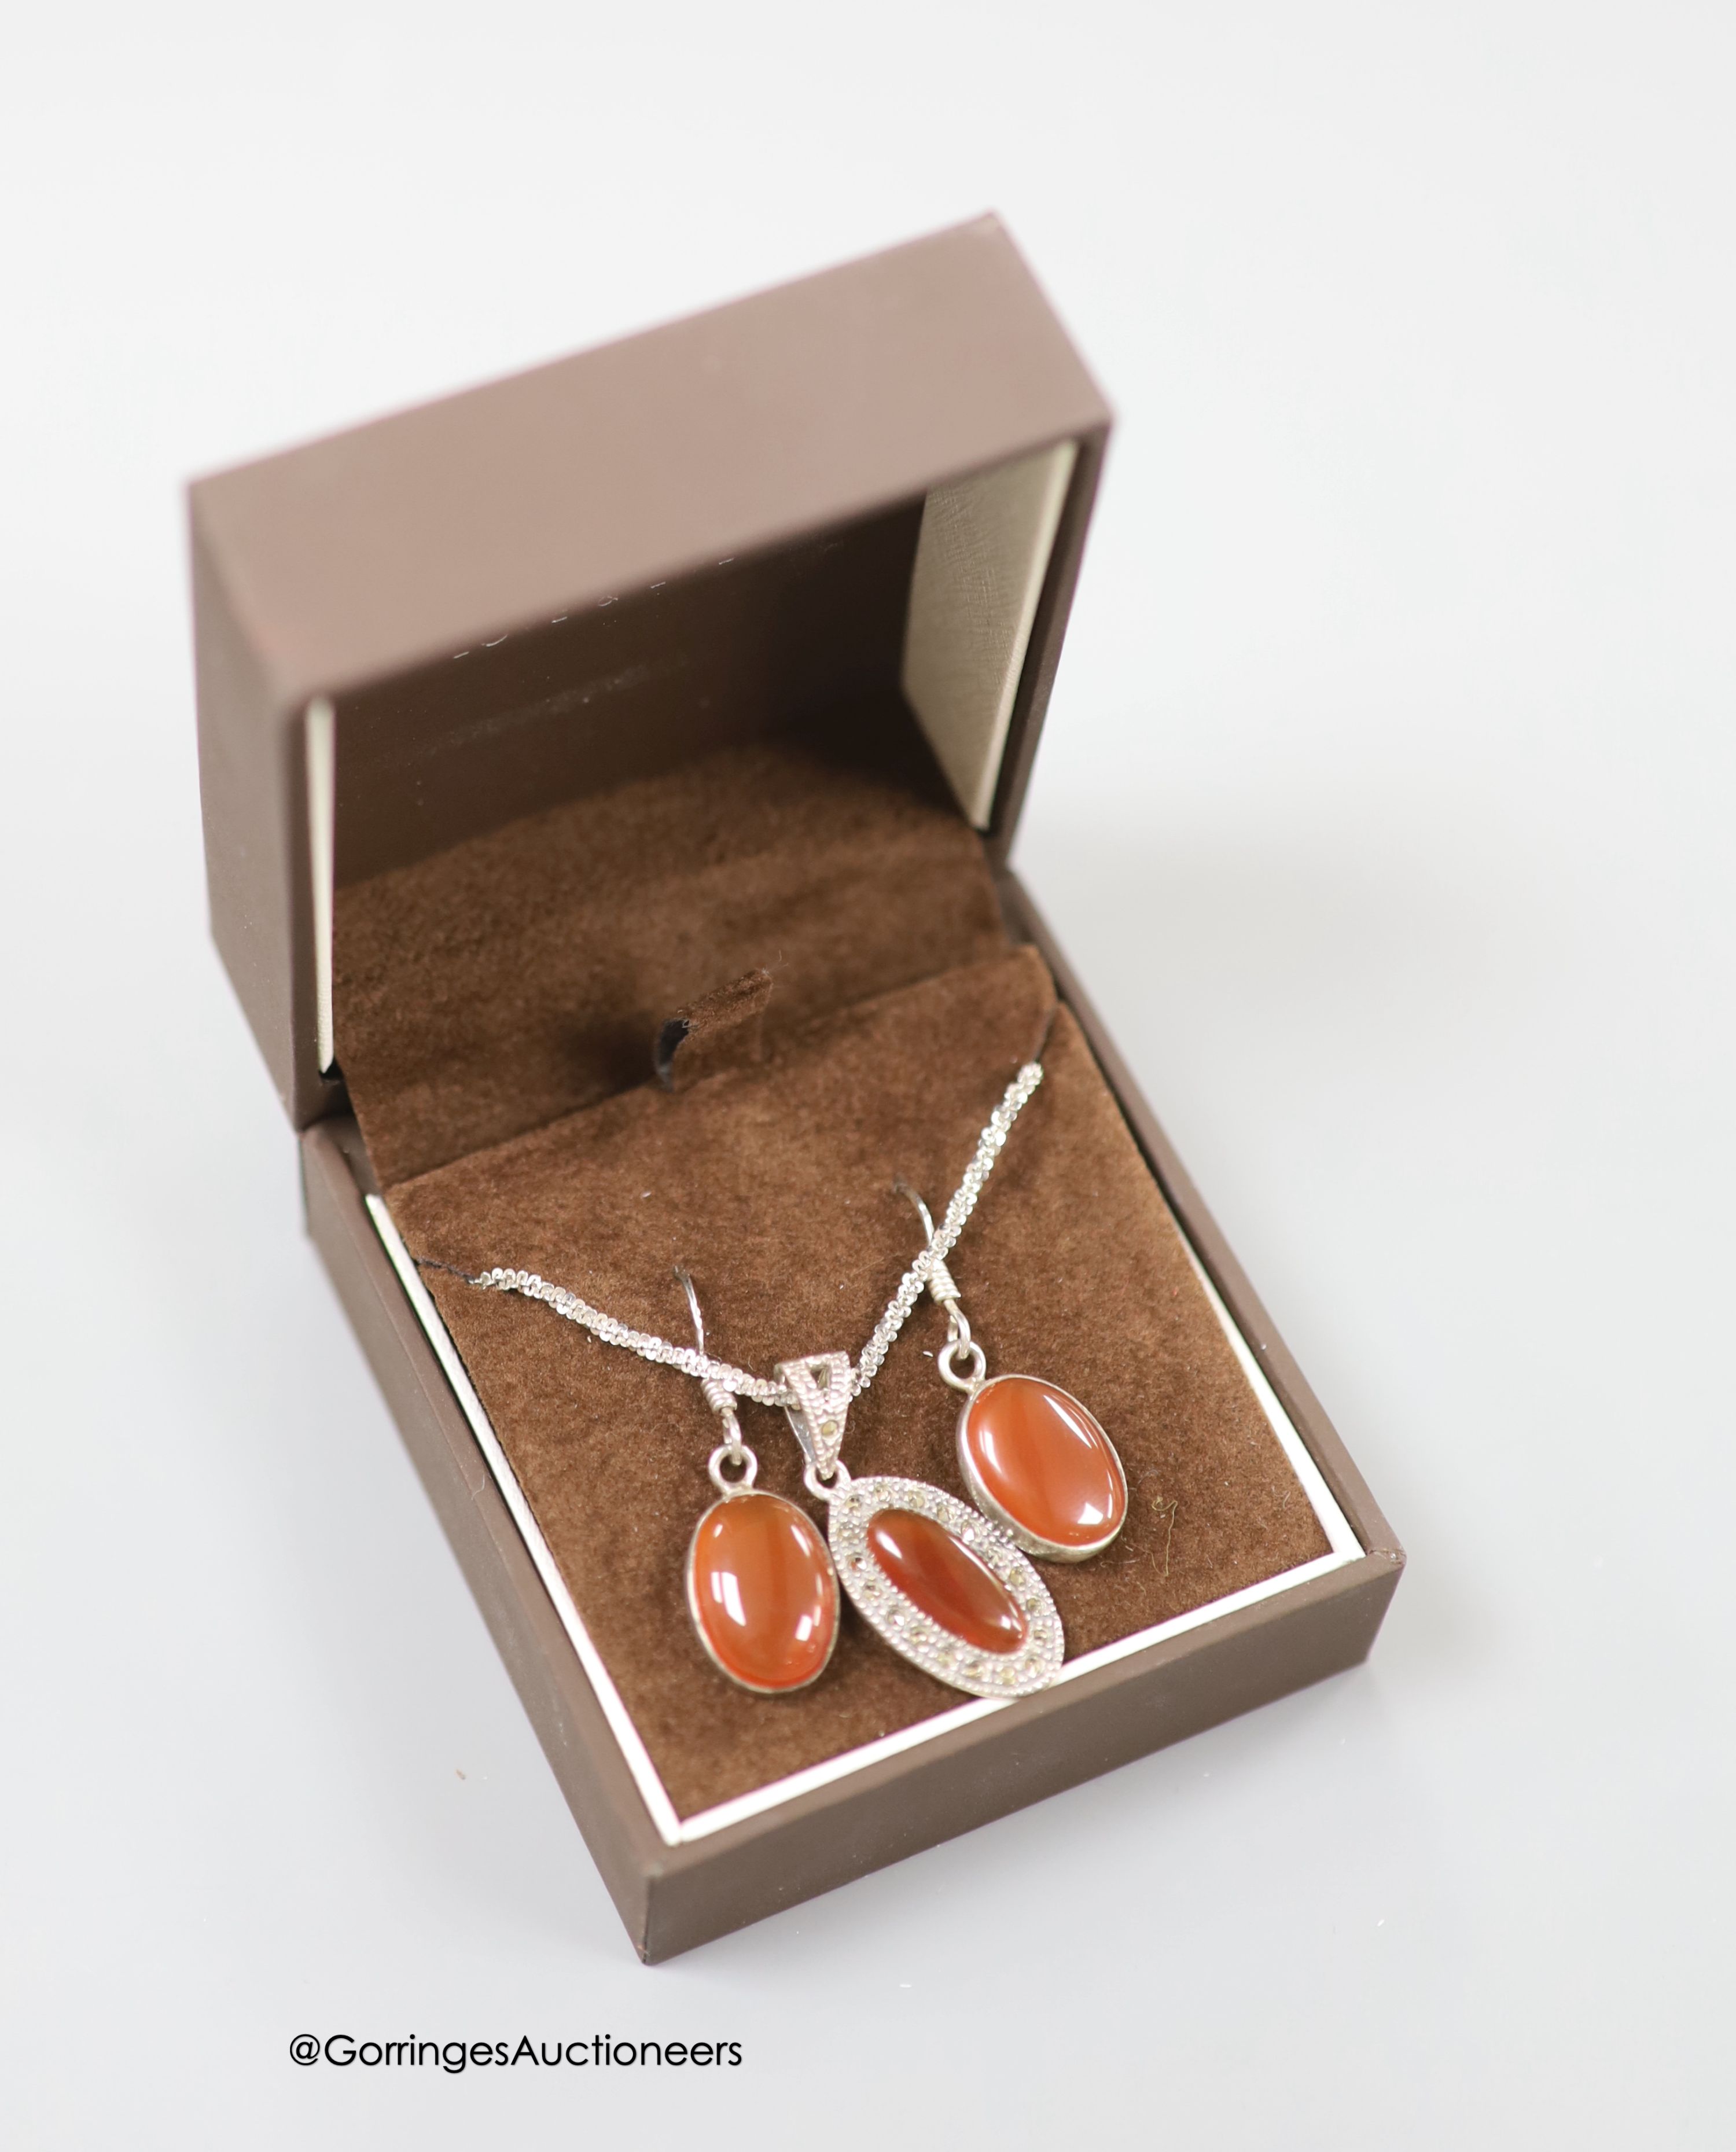 A 925, chalcedony and marcasite set necklace and a pair of similar earrings.